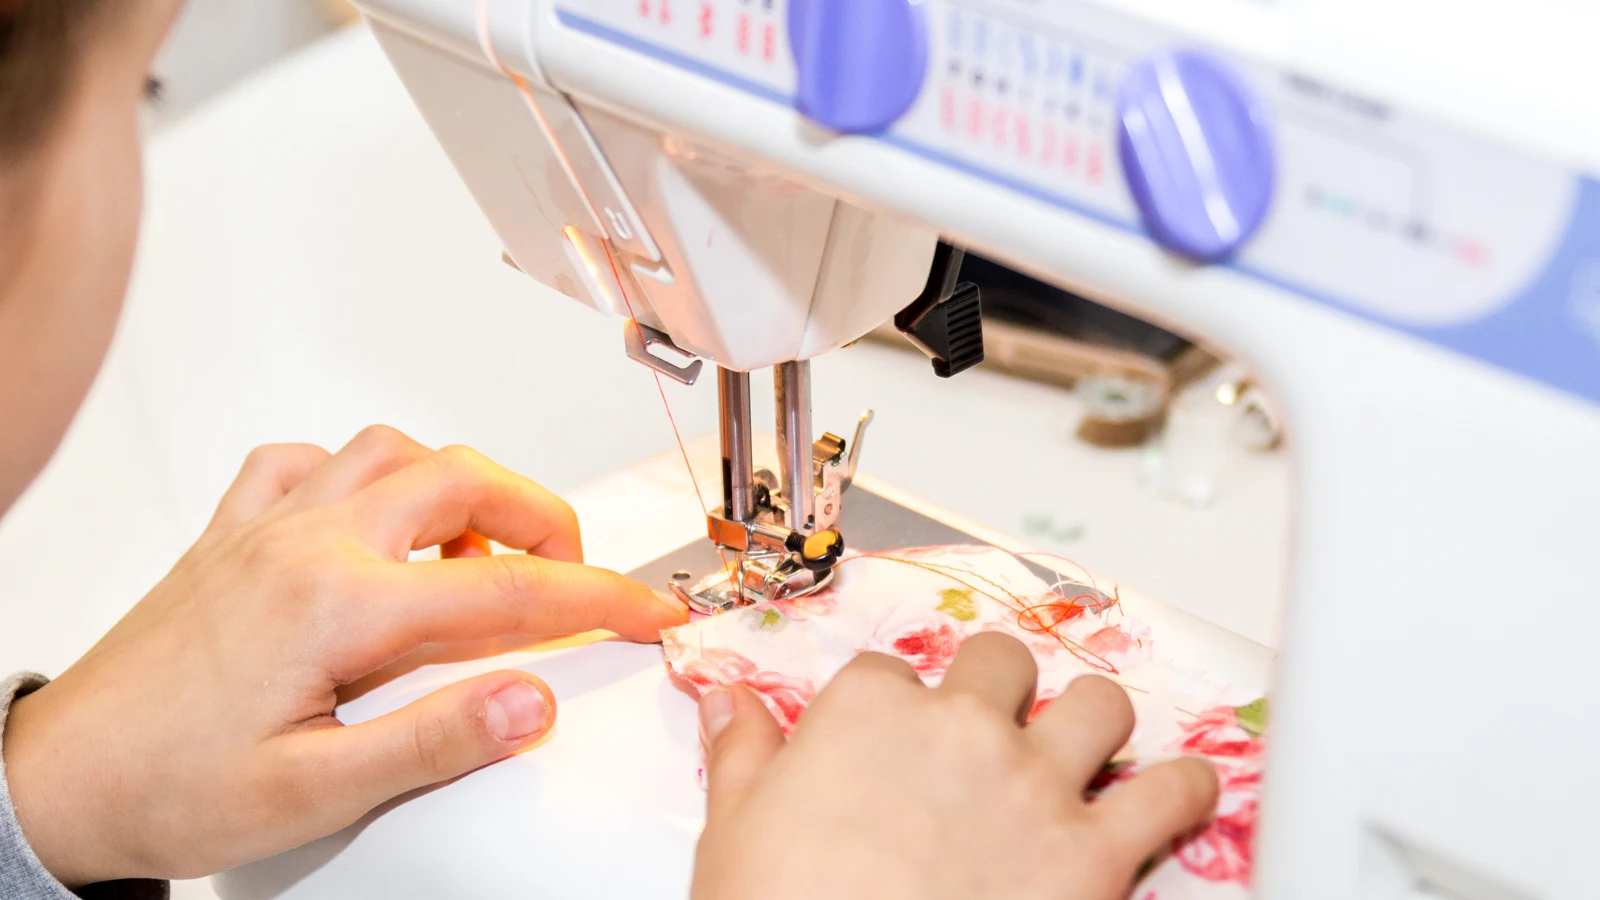 How to Sew Brocade Fabric: Tips for Sewing with Brocade Fabric